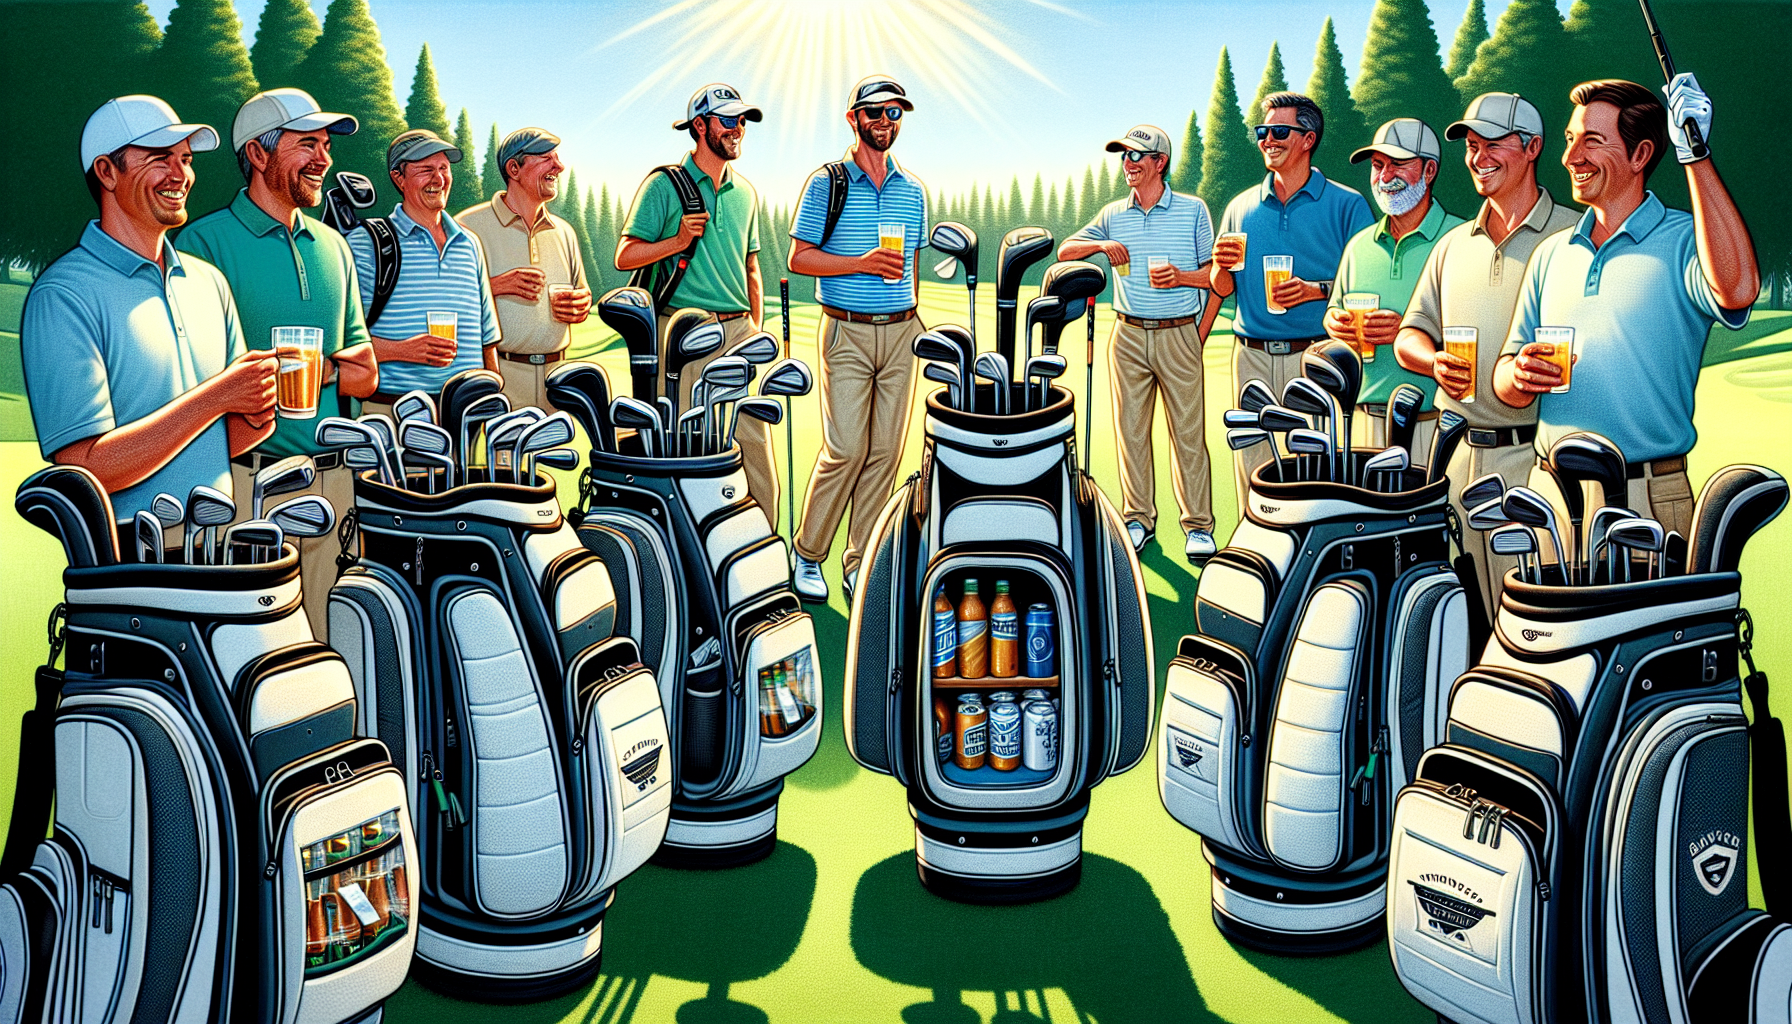 The Rise of Golf Bags with Built-In Coolers!